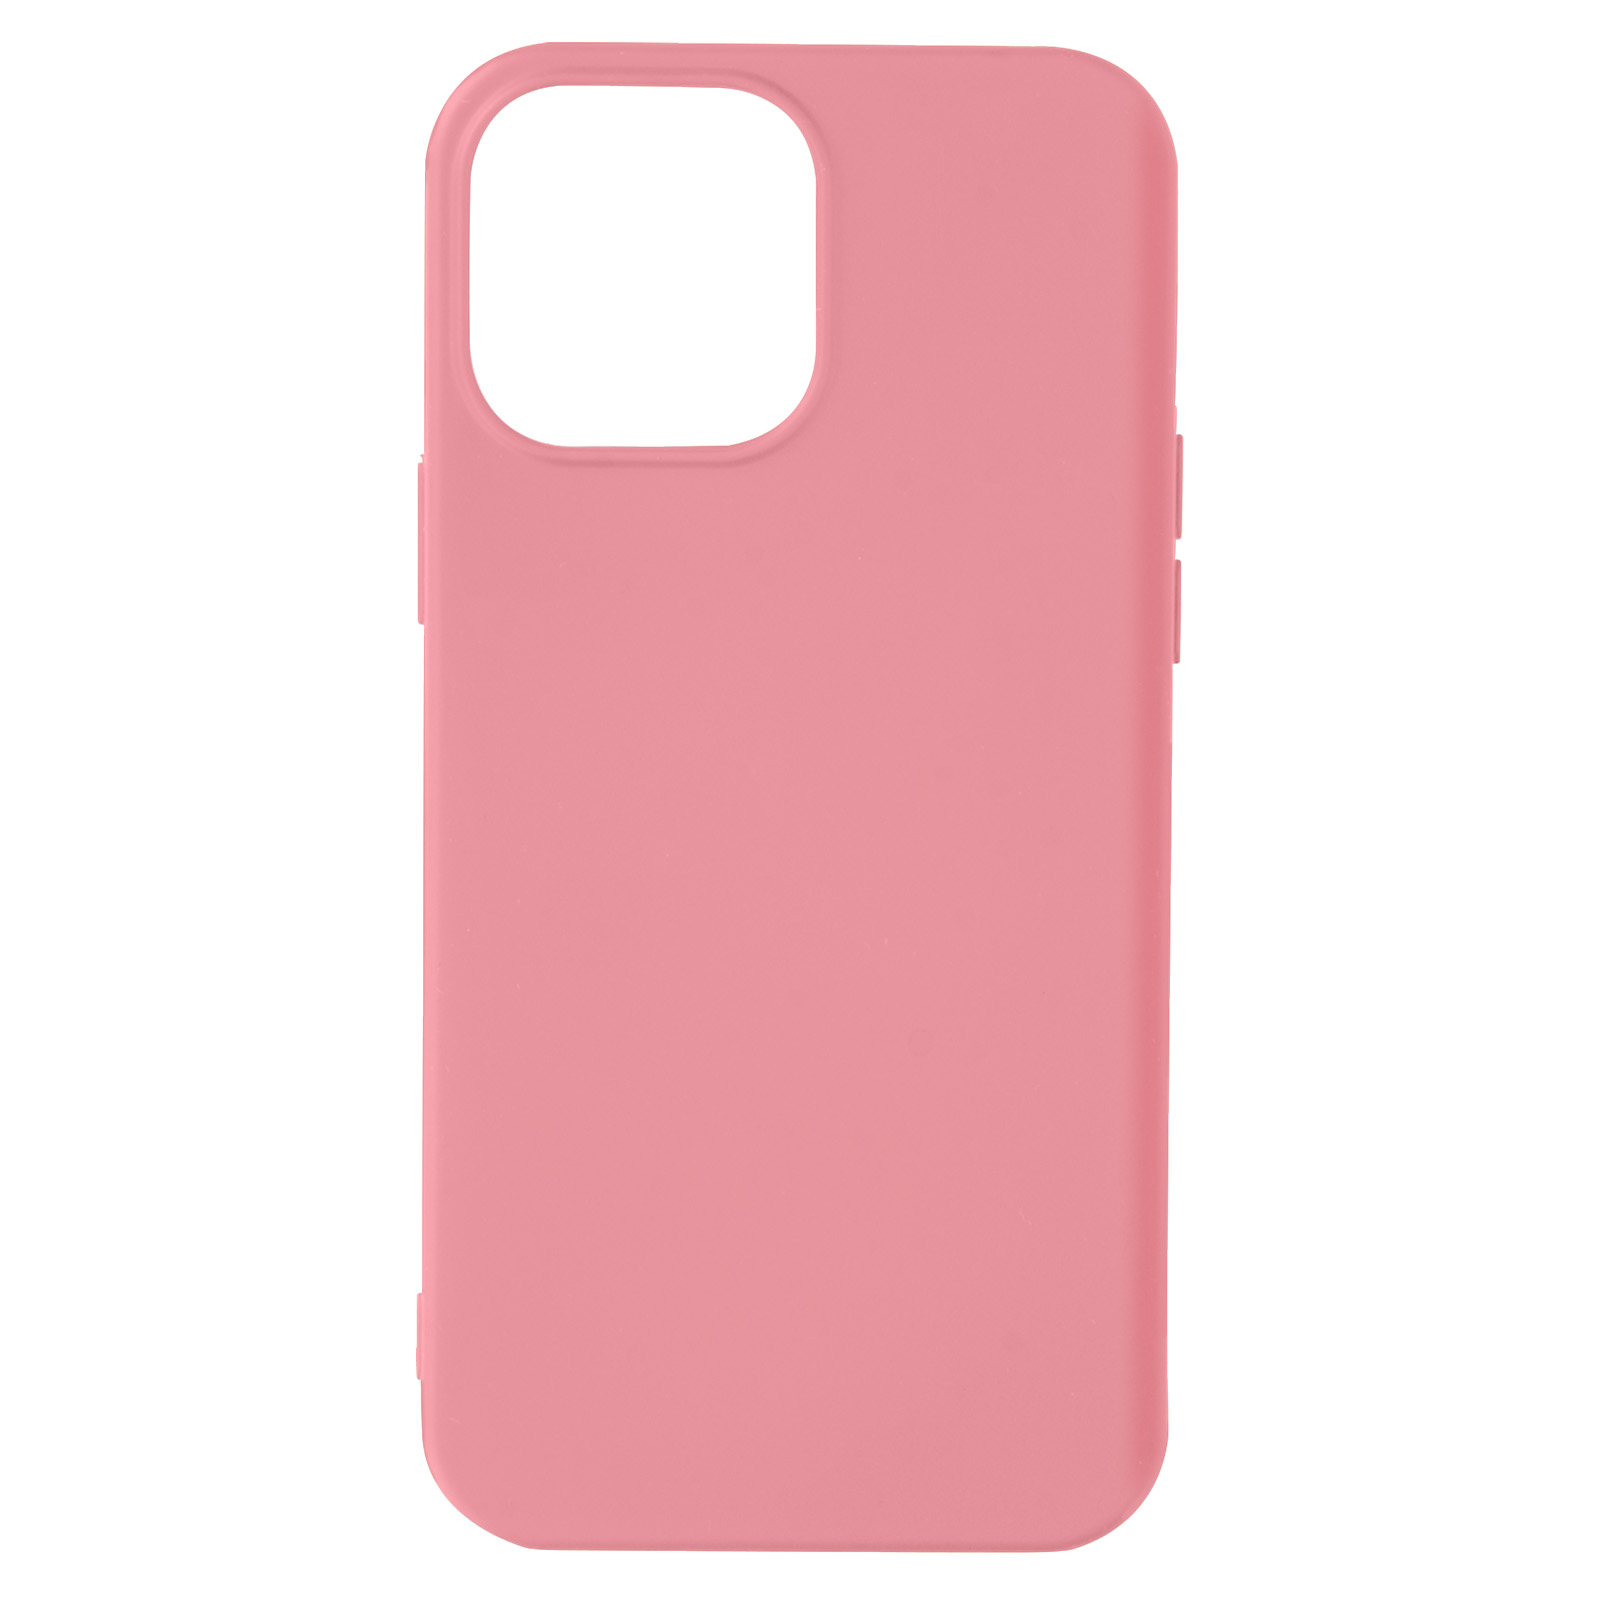 iPhone 13 Max, Backcover, Pro Apple, AVIZAR Rosa Fast Series,